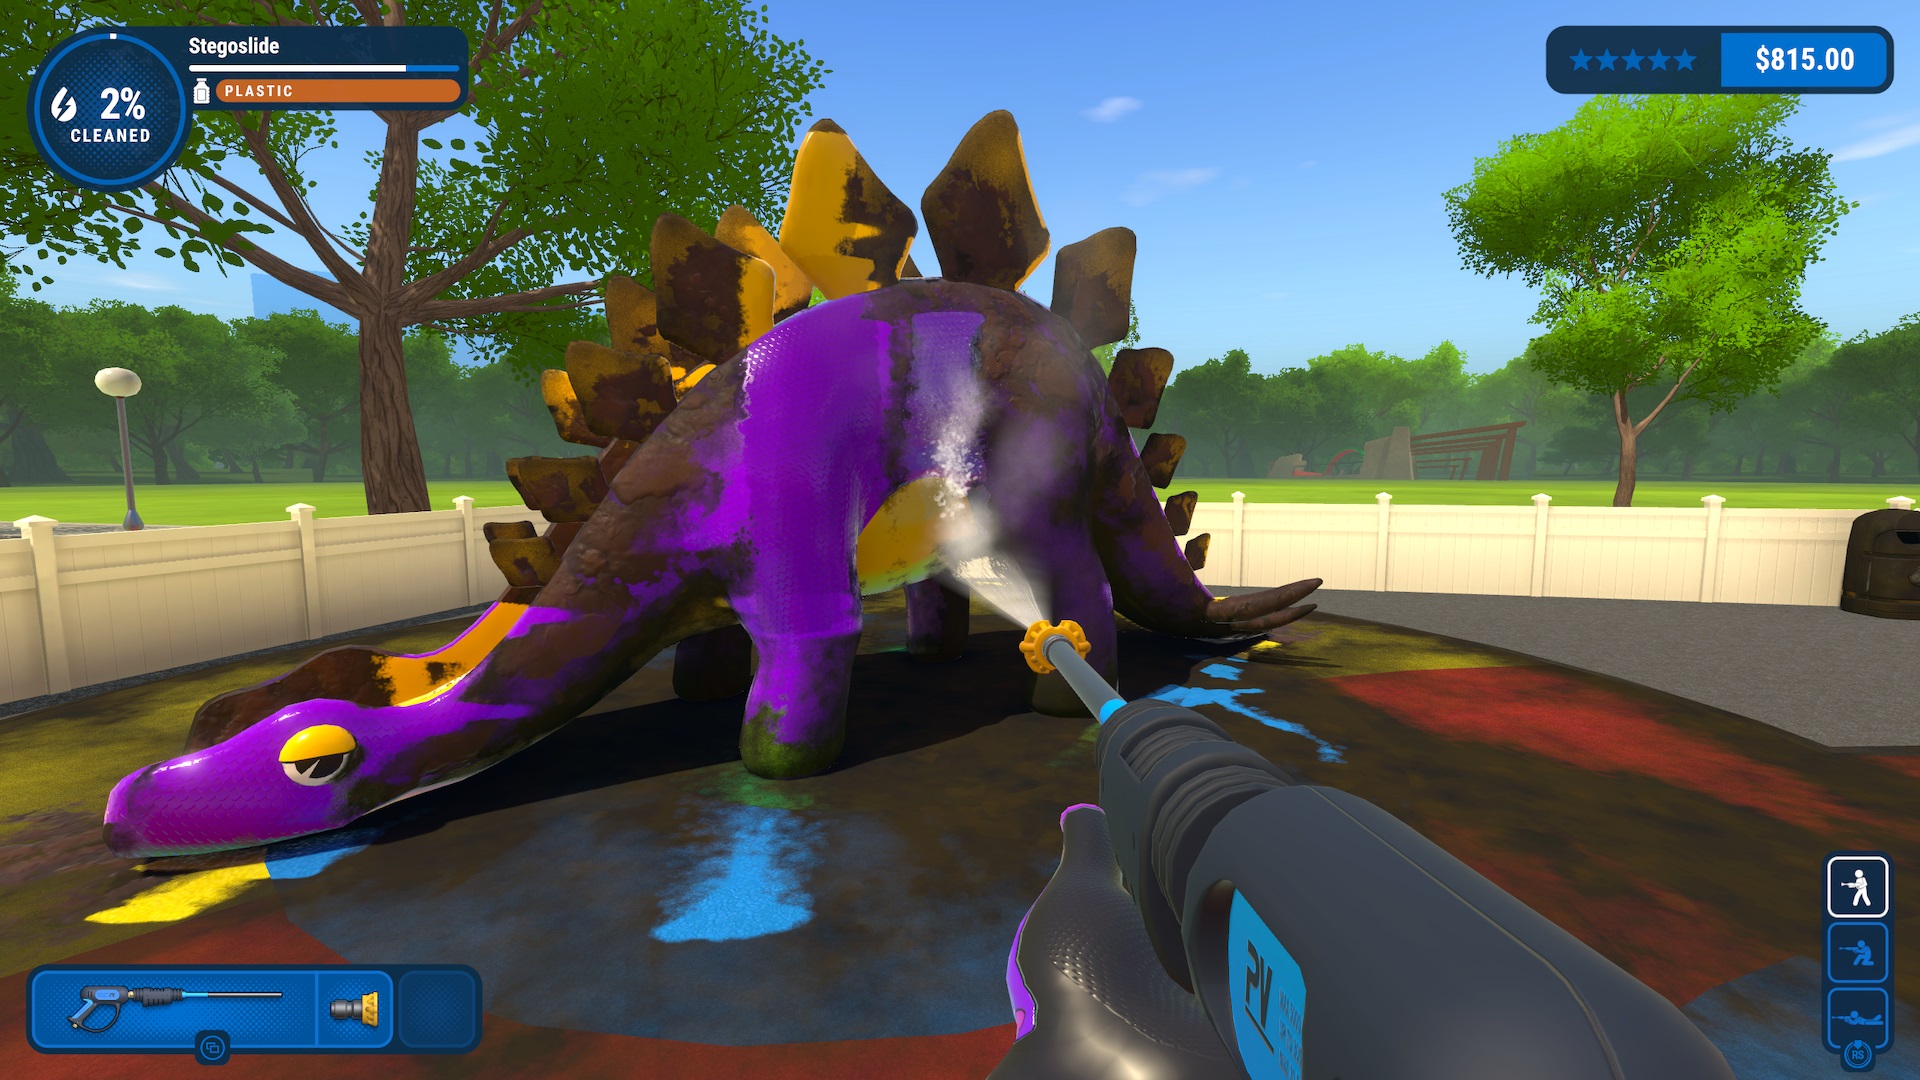 PowerWash Simulator is an upcoming game about wiping out grime